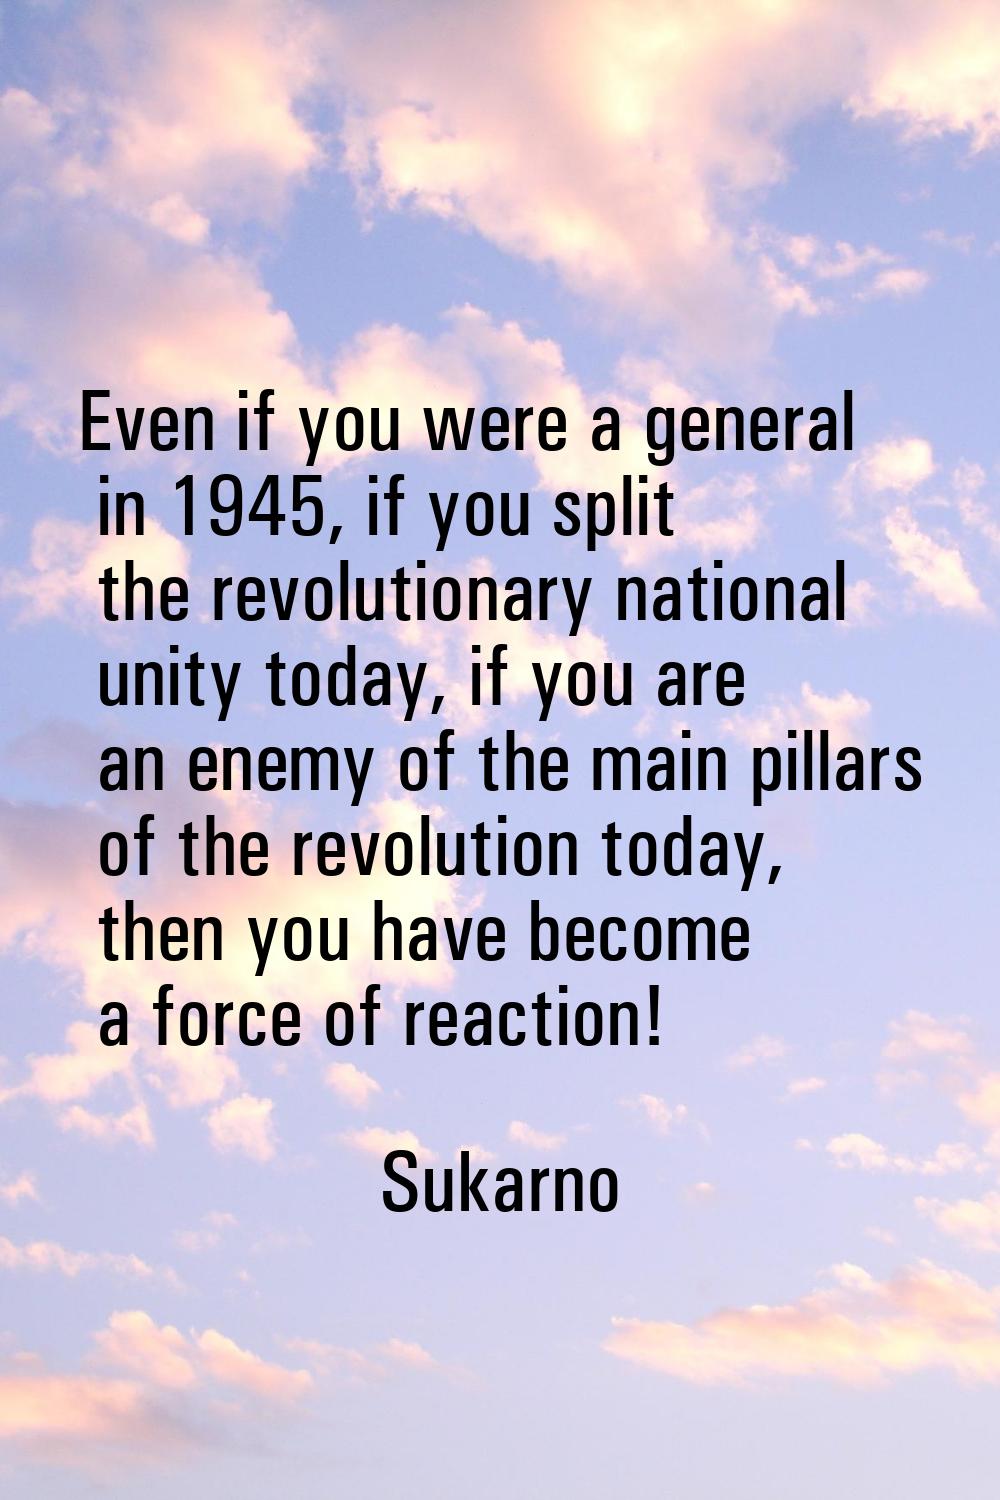 Even if you were a general in 1945, if you split the revolutionary national unity today, if you are